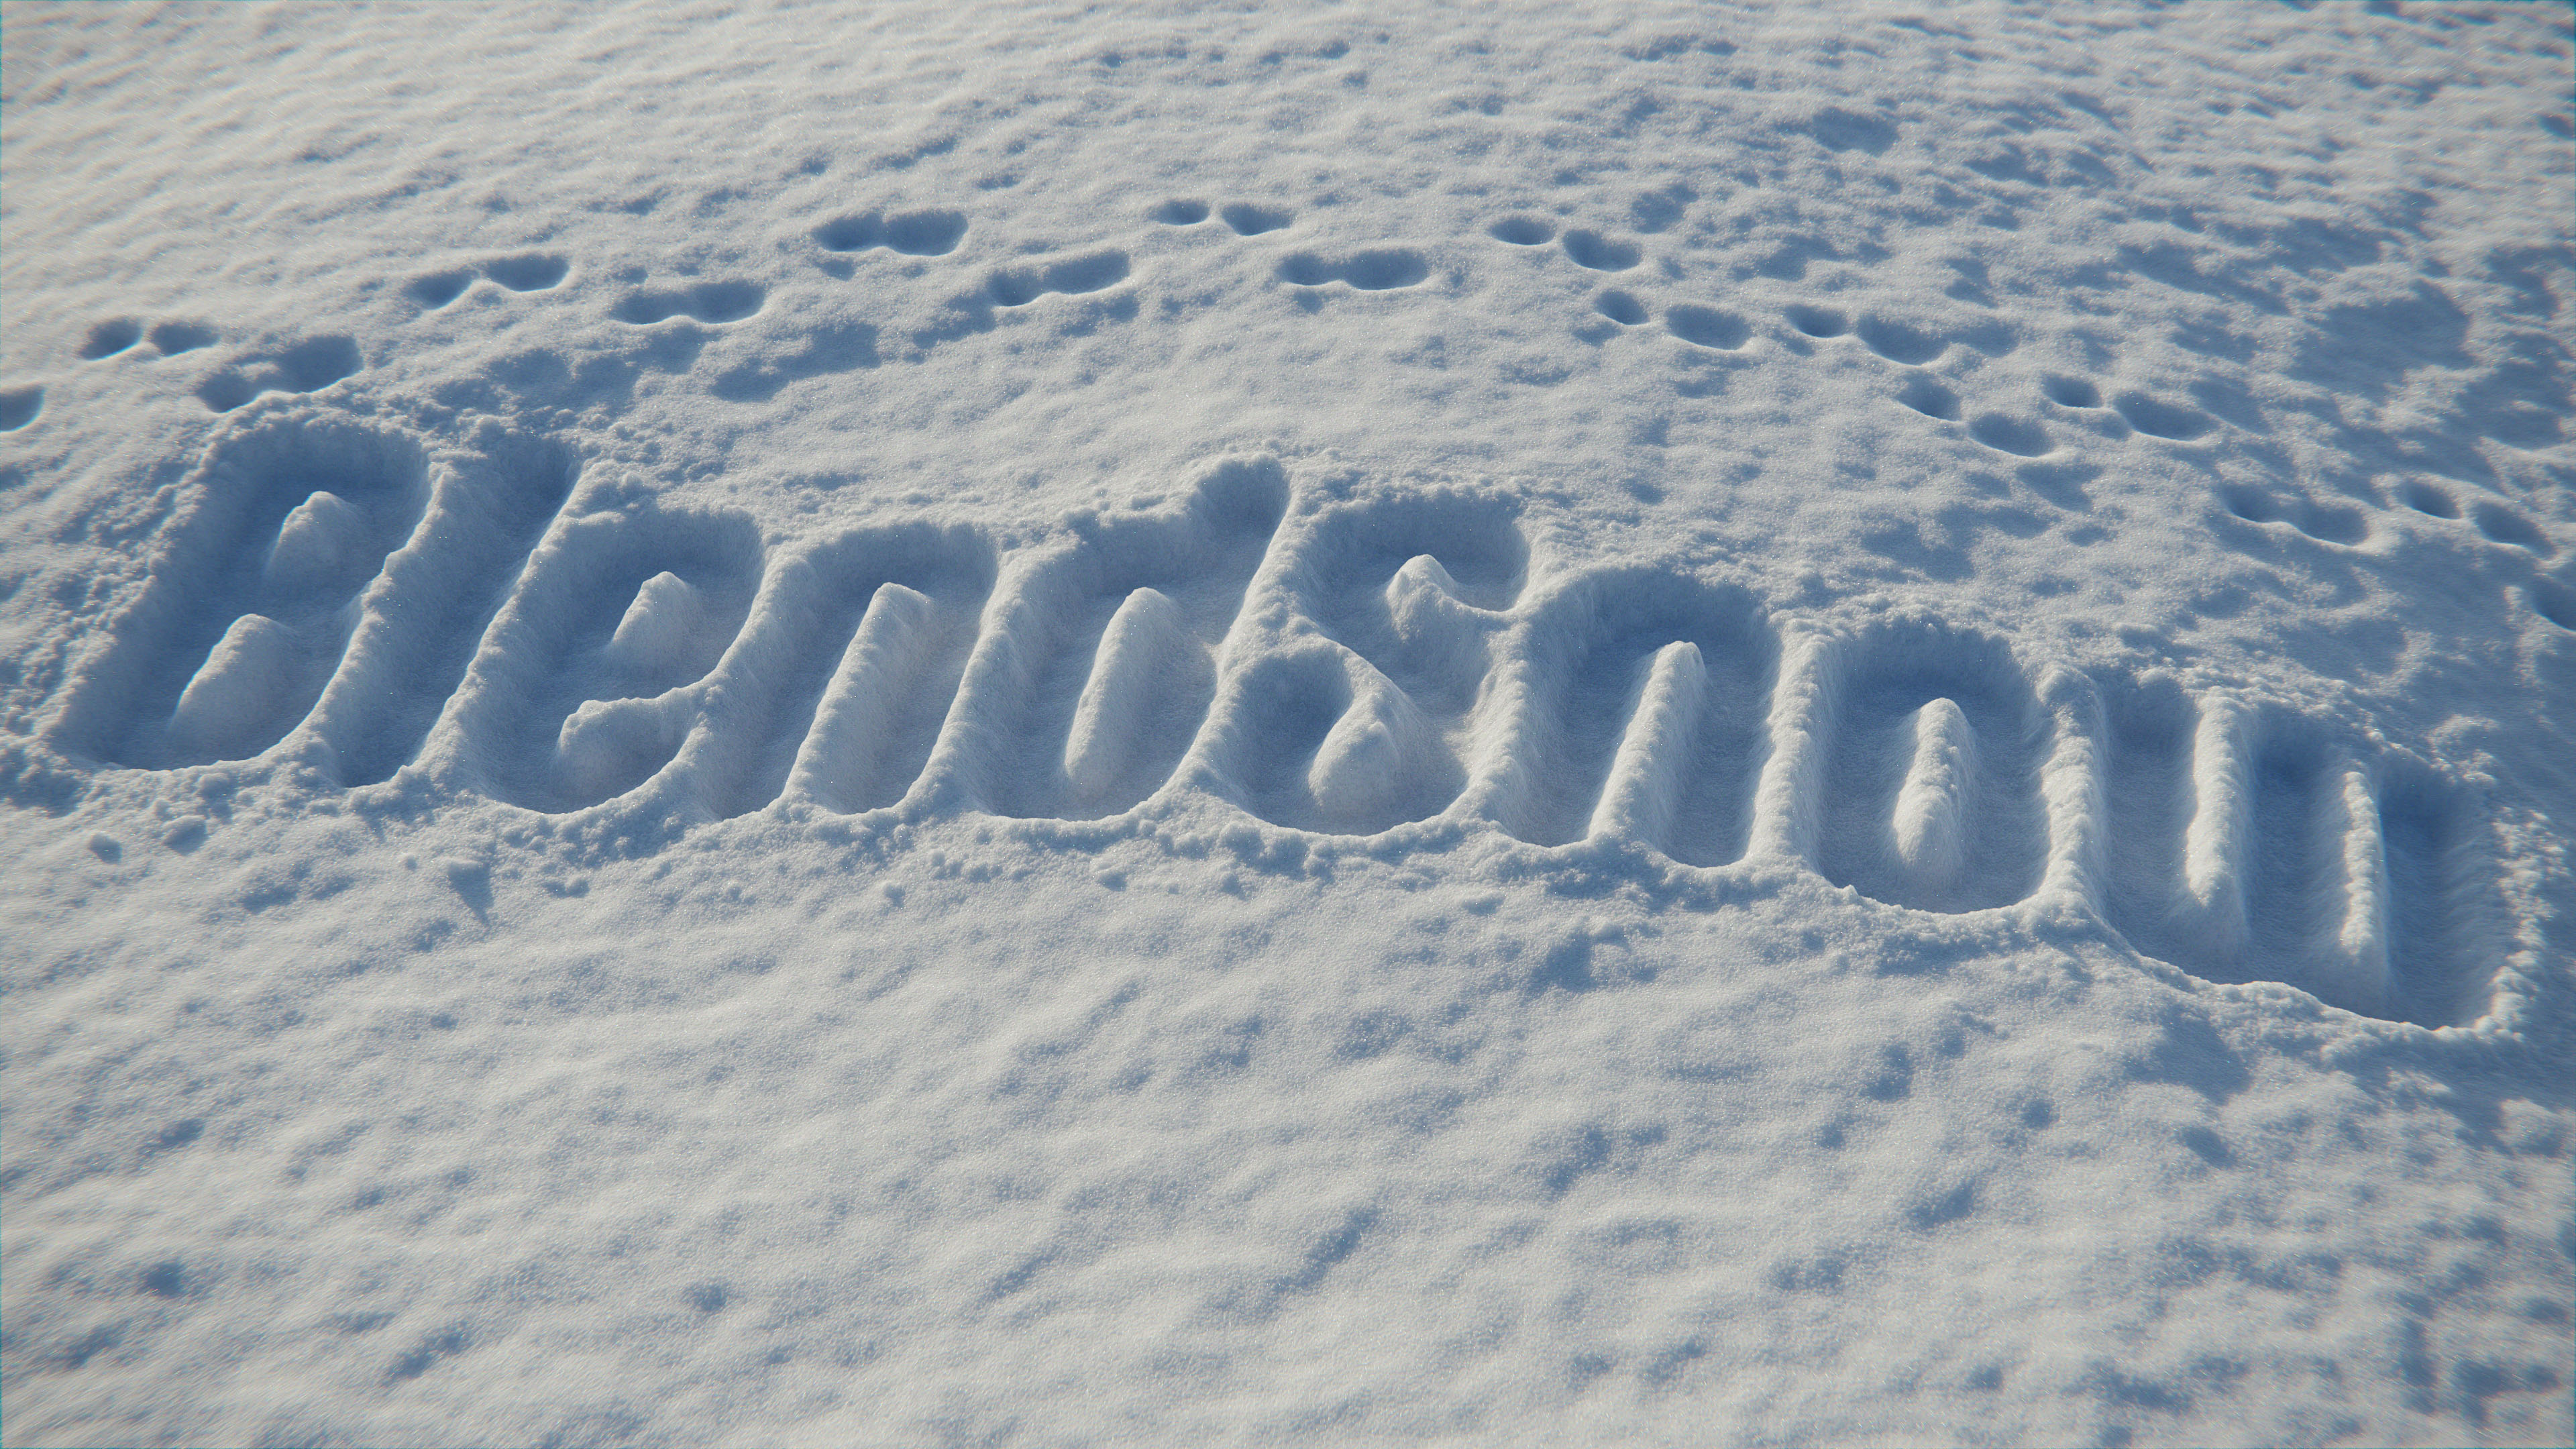 BlendSnow - 100% procedural realistic snow material for Blender Cycles (now with Asset Browser support)